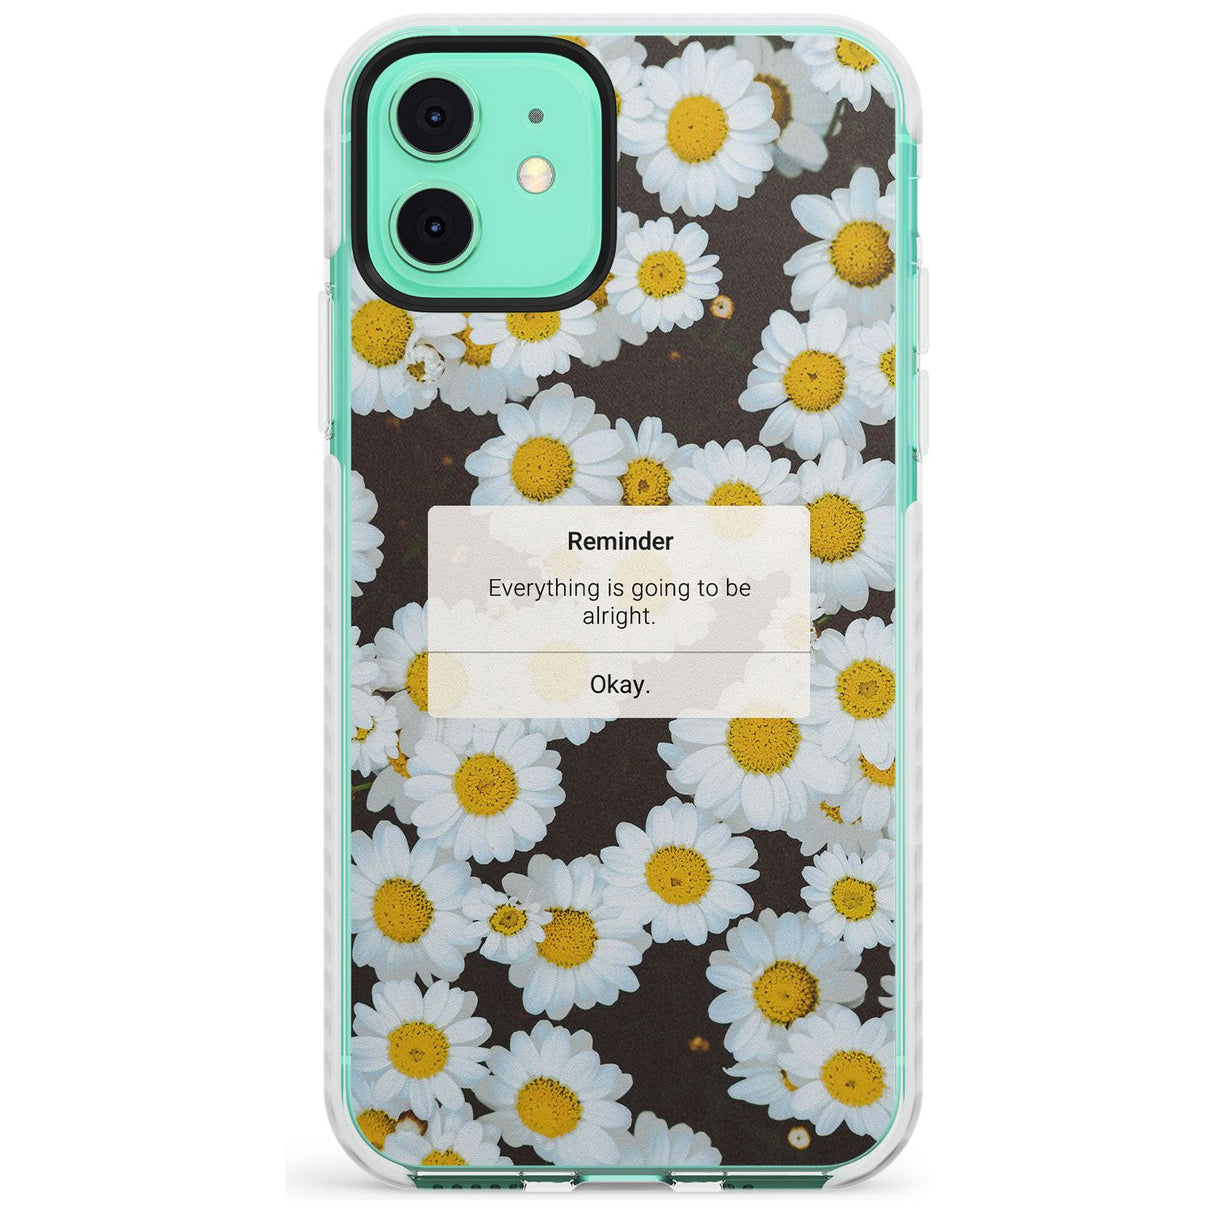 "Everything will be alright" iPhone Reminder Slim TPU Phone Case for iPhone 11